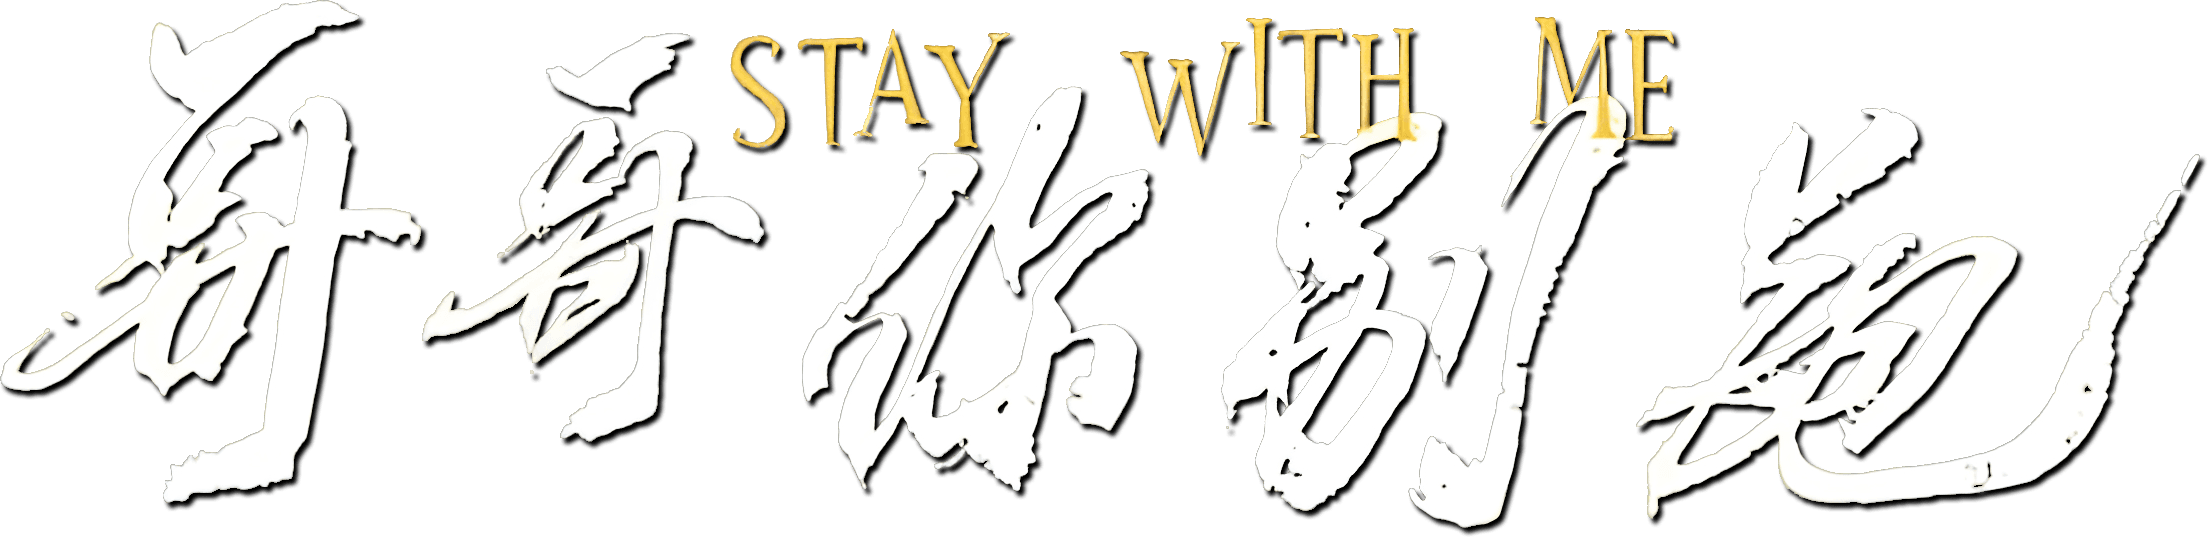 Stay With Me logo